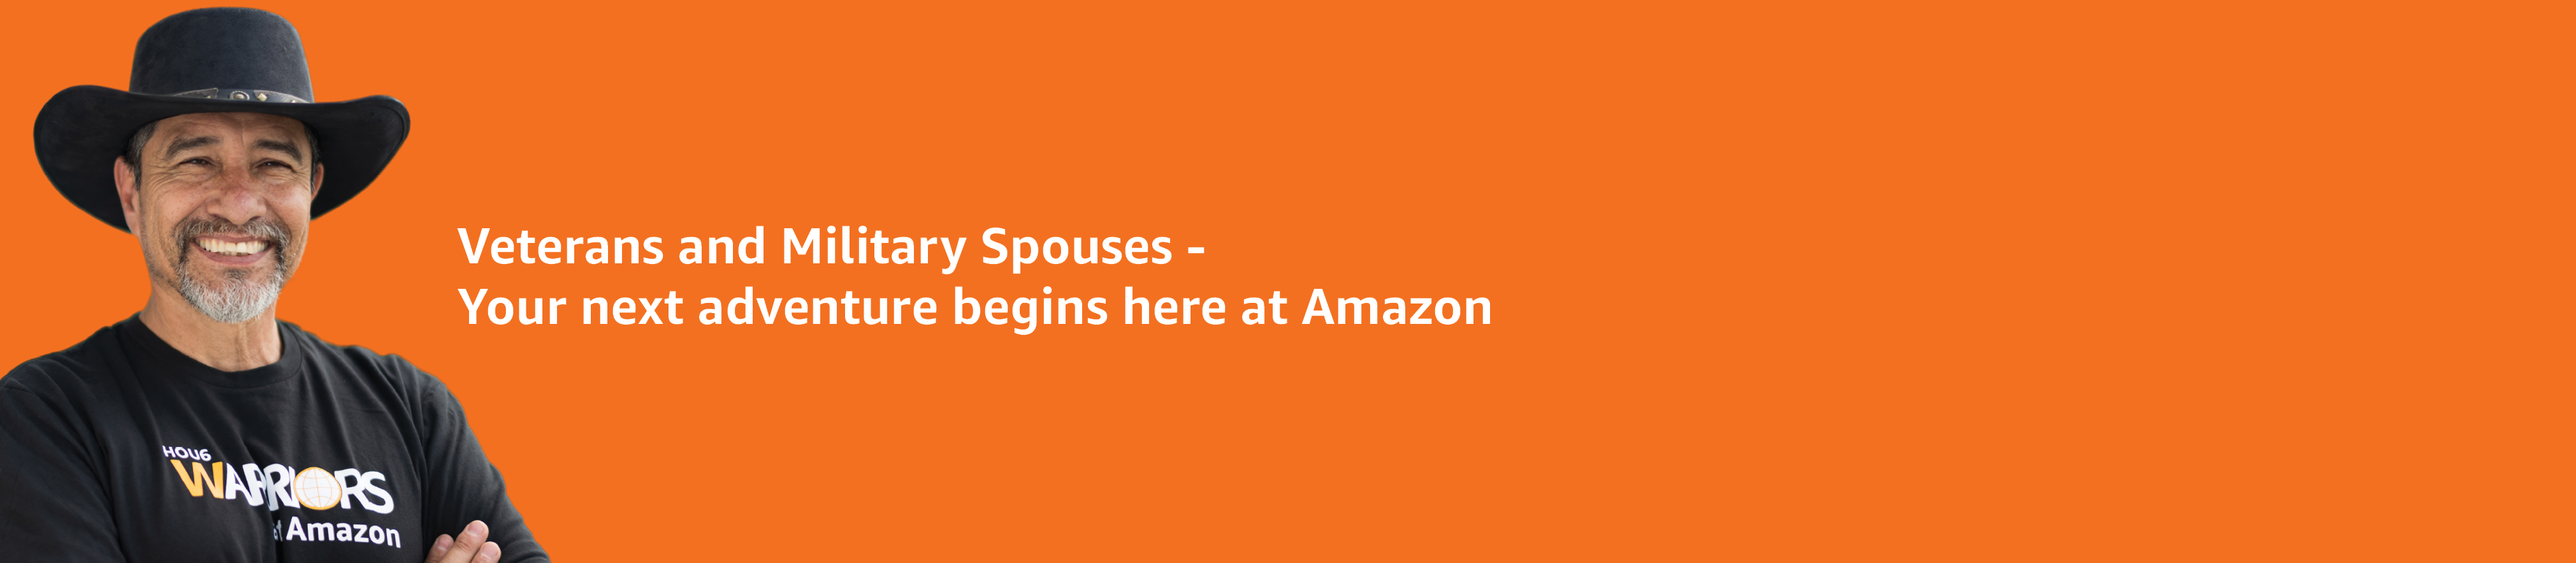 Veterans and Military Spouses - Your next adventure begins here at Amazon